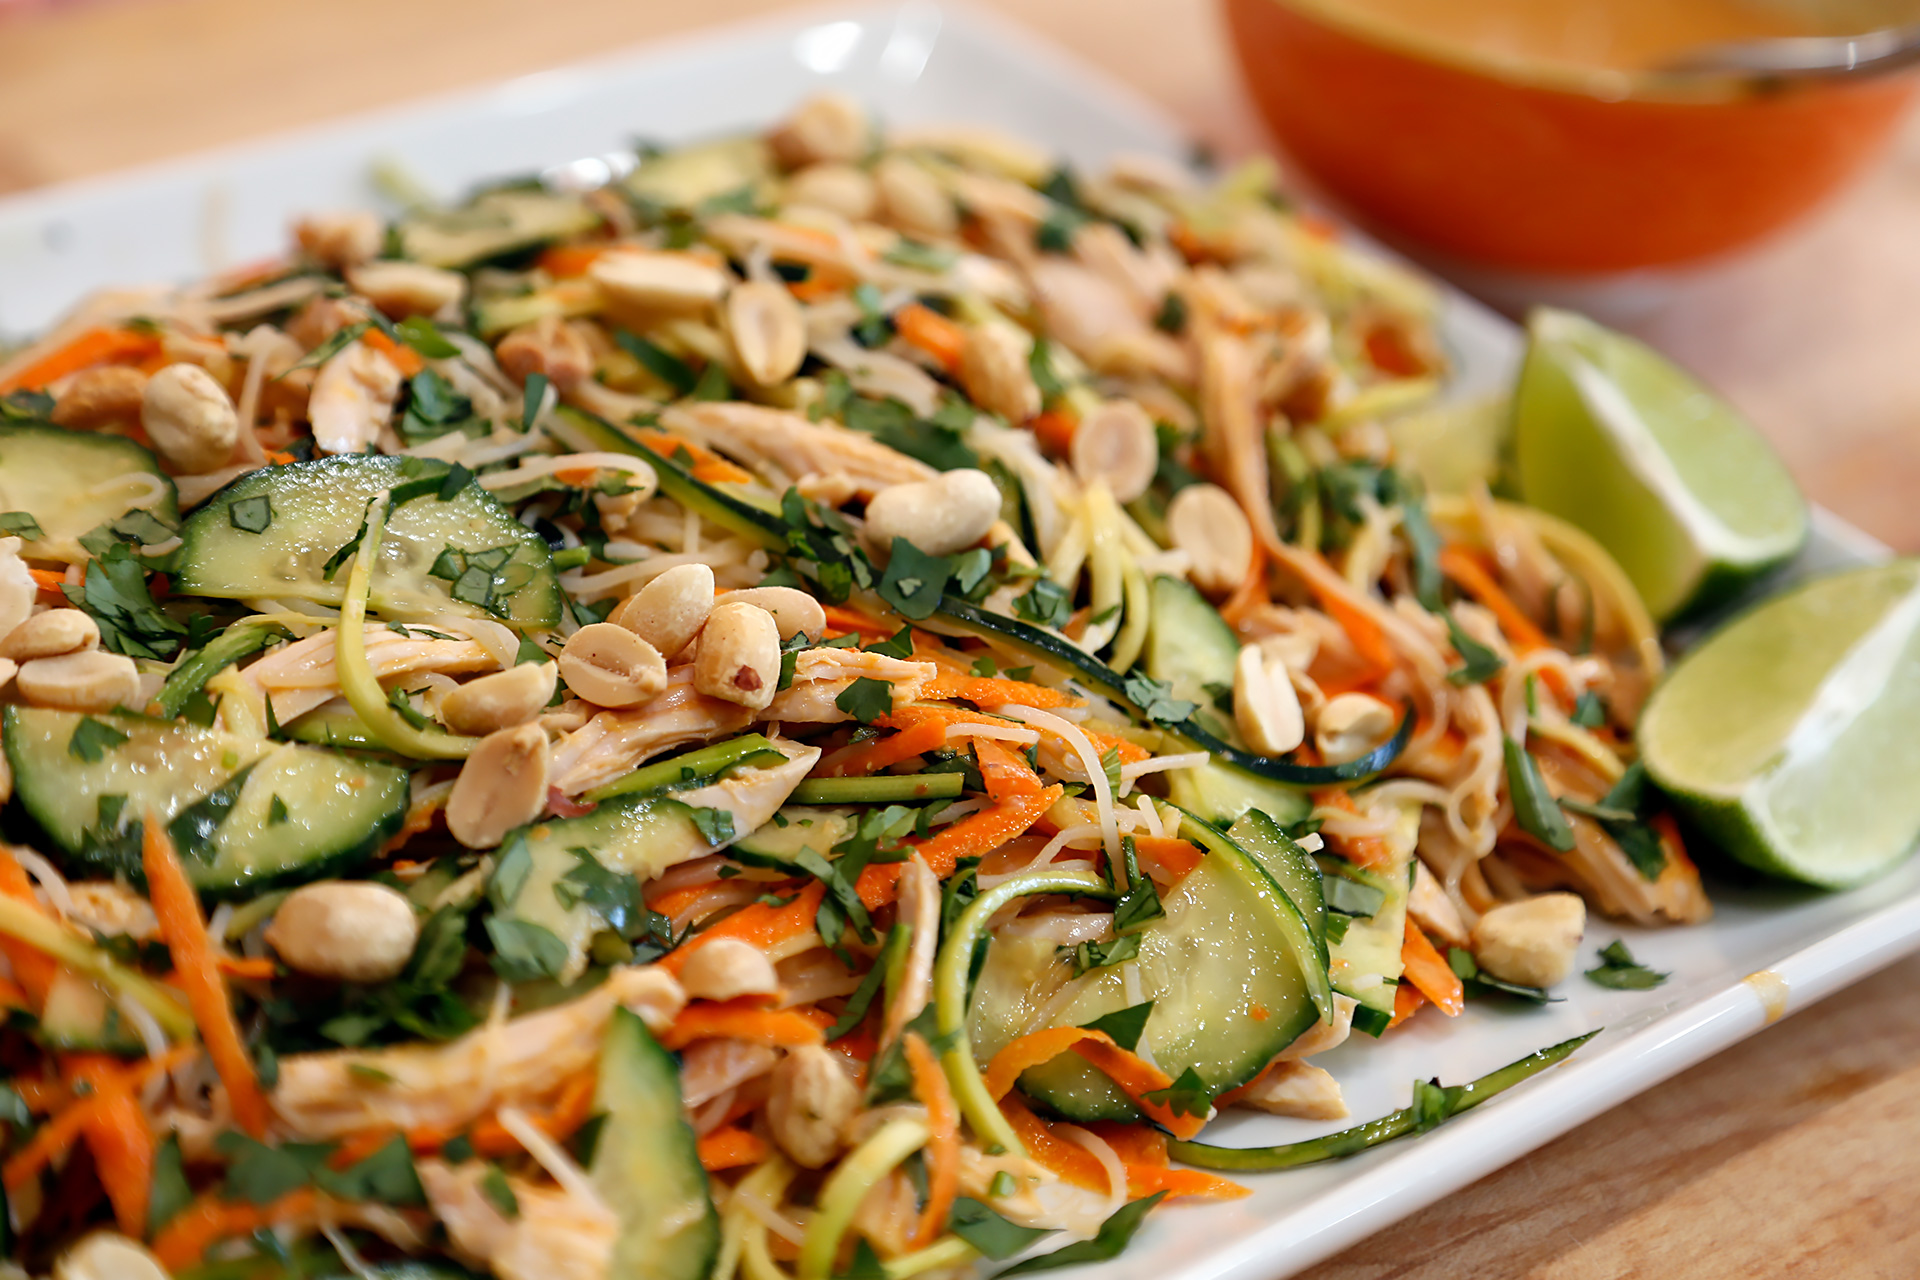 Asian-Style Noodle Salad with Turkey, Veggies, Herbs, and Lime-Peanut Vinaigrette.